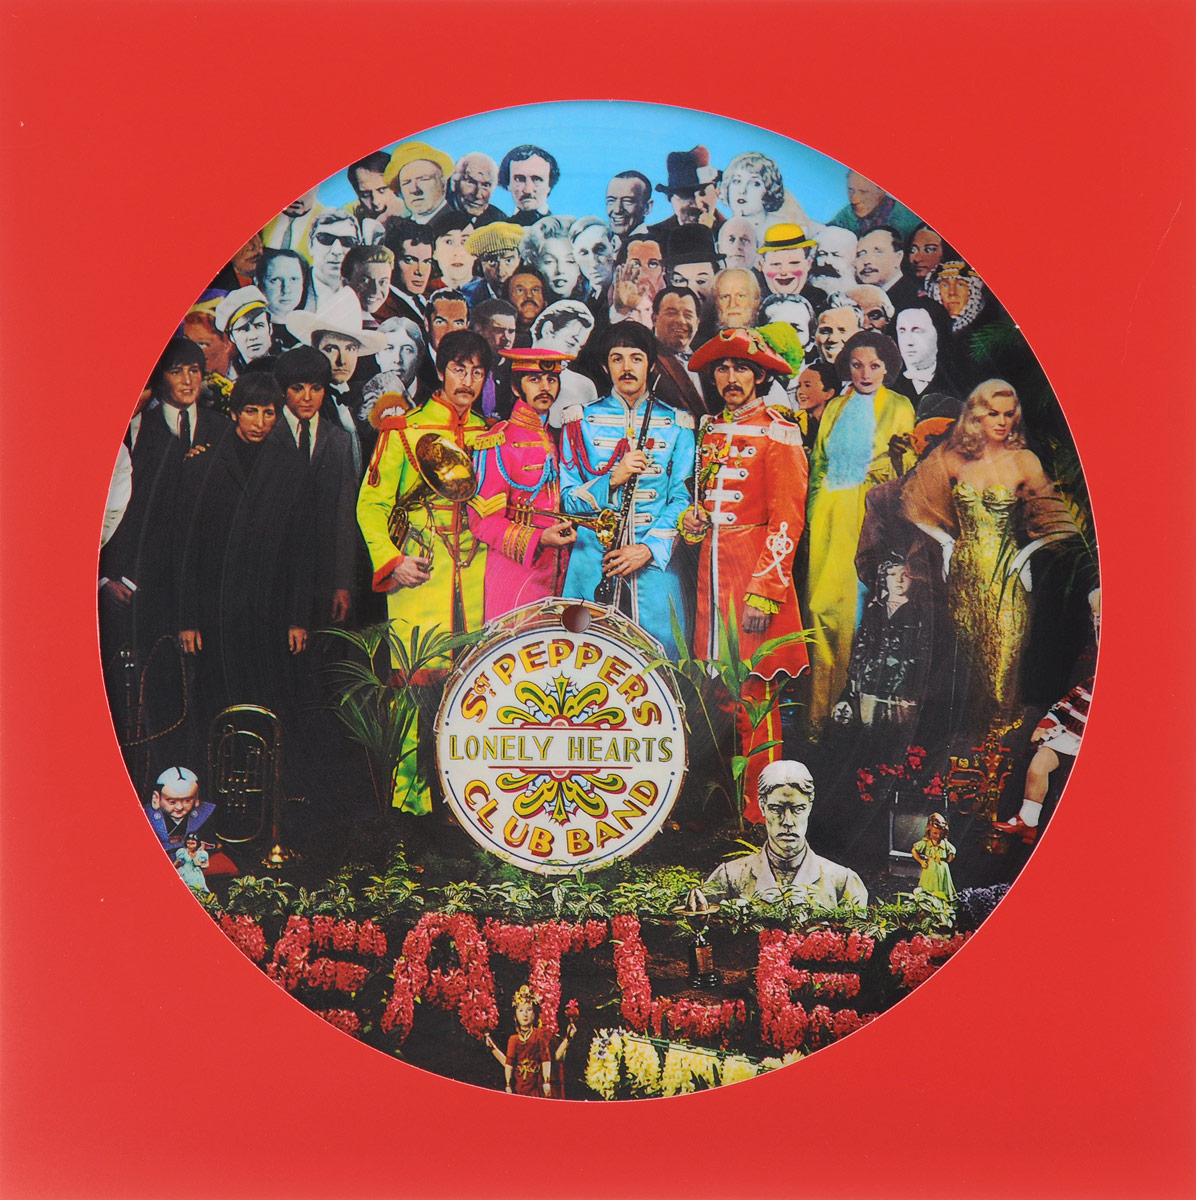 Beatles sgt pepper lonely. Sgt Pepper's Lonely Hearts Club Band. Sgt. Pepper s Lonely Hearts Club Band the Beatles. Beatles Sergeant Pepper's Lonely Hearts Club Band. Битлз Sgt Pepper s Lonely Hearts Club Band.